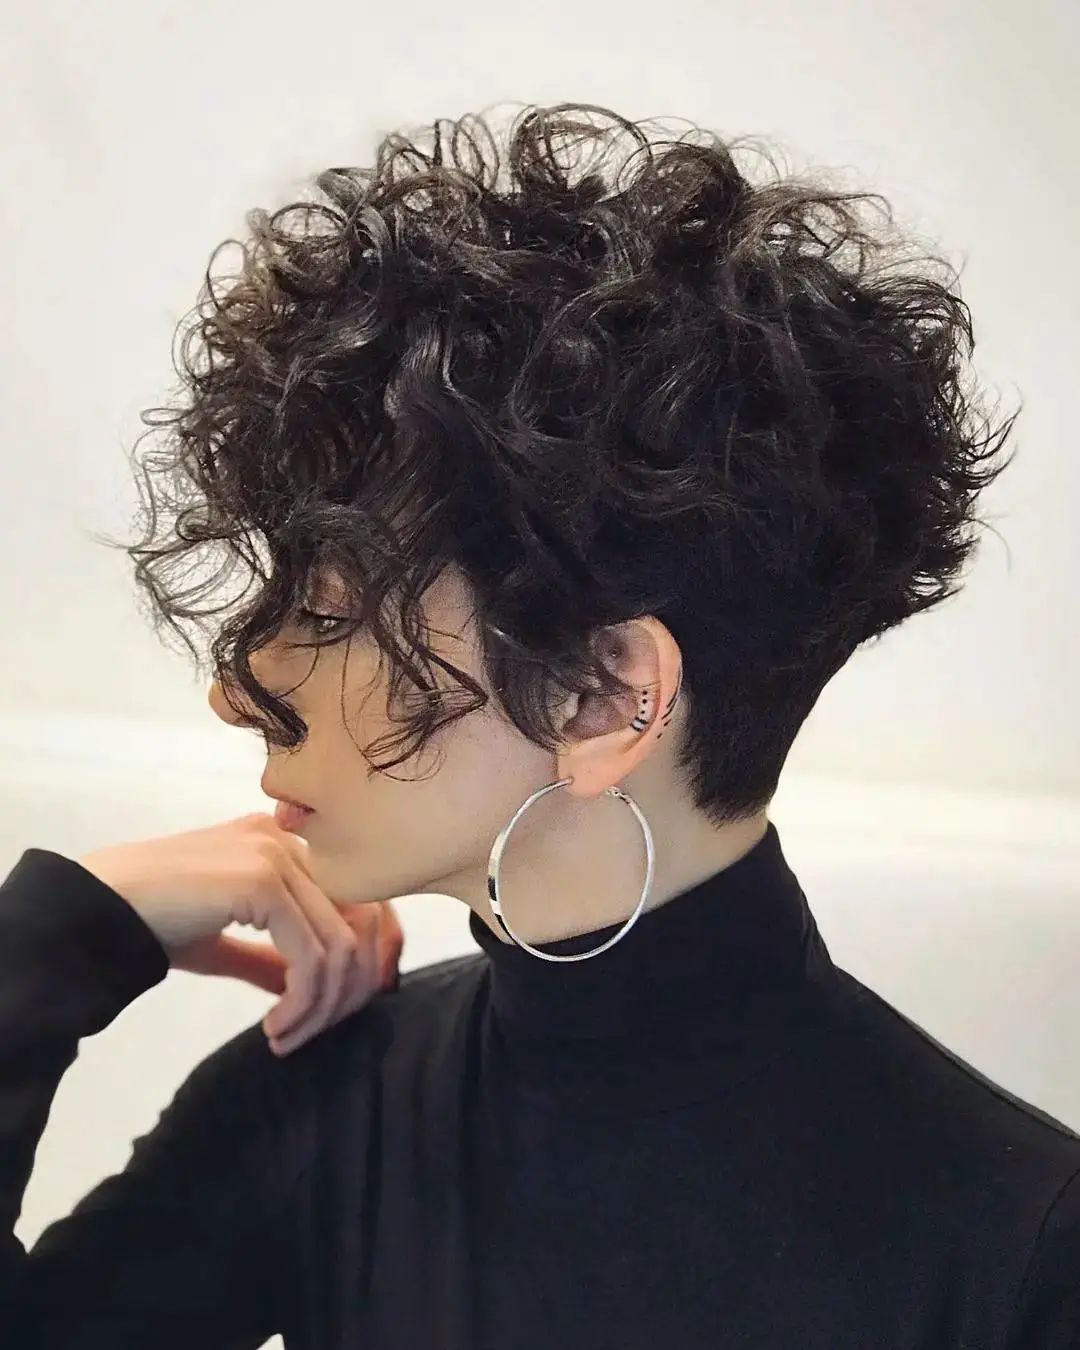 55-best-tapered-haircuts-and-fades-for-women Curly Pixie with Long Bangs